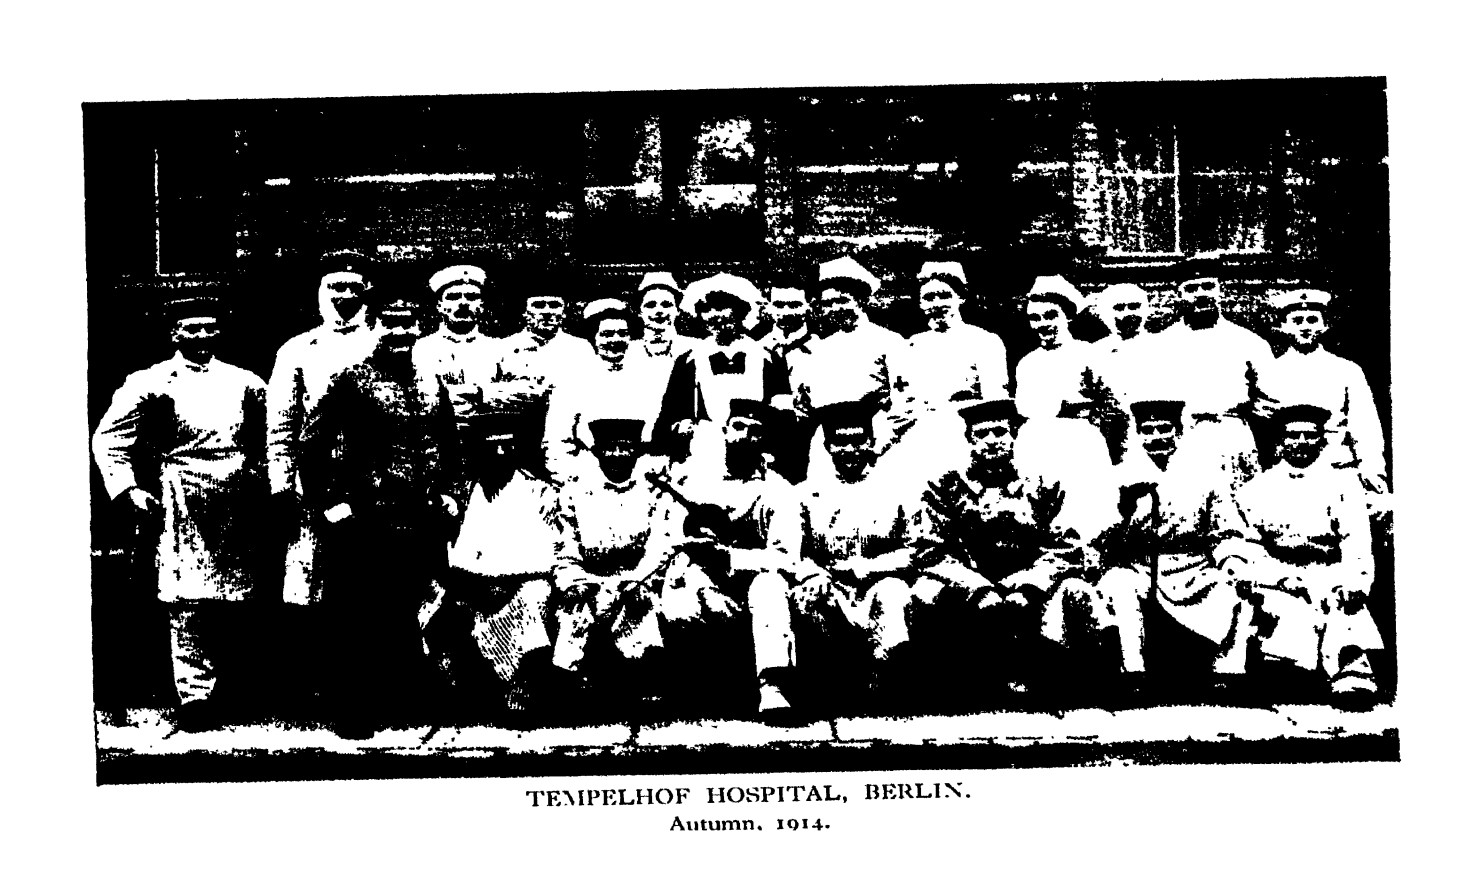 A civilian-military medical unit of male and female doctors, captioned Templehof Hospital, Berlin, Autumn 1914.